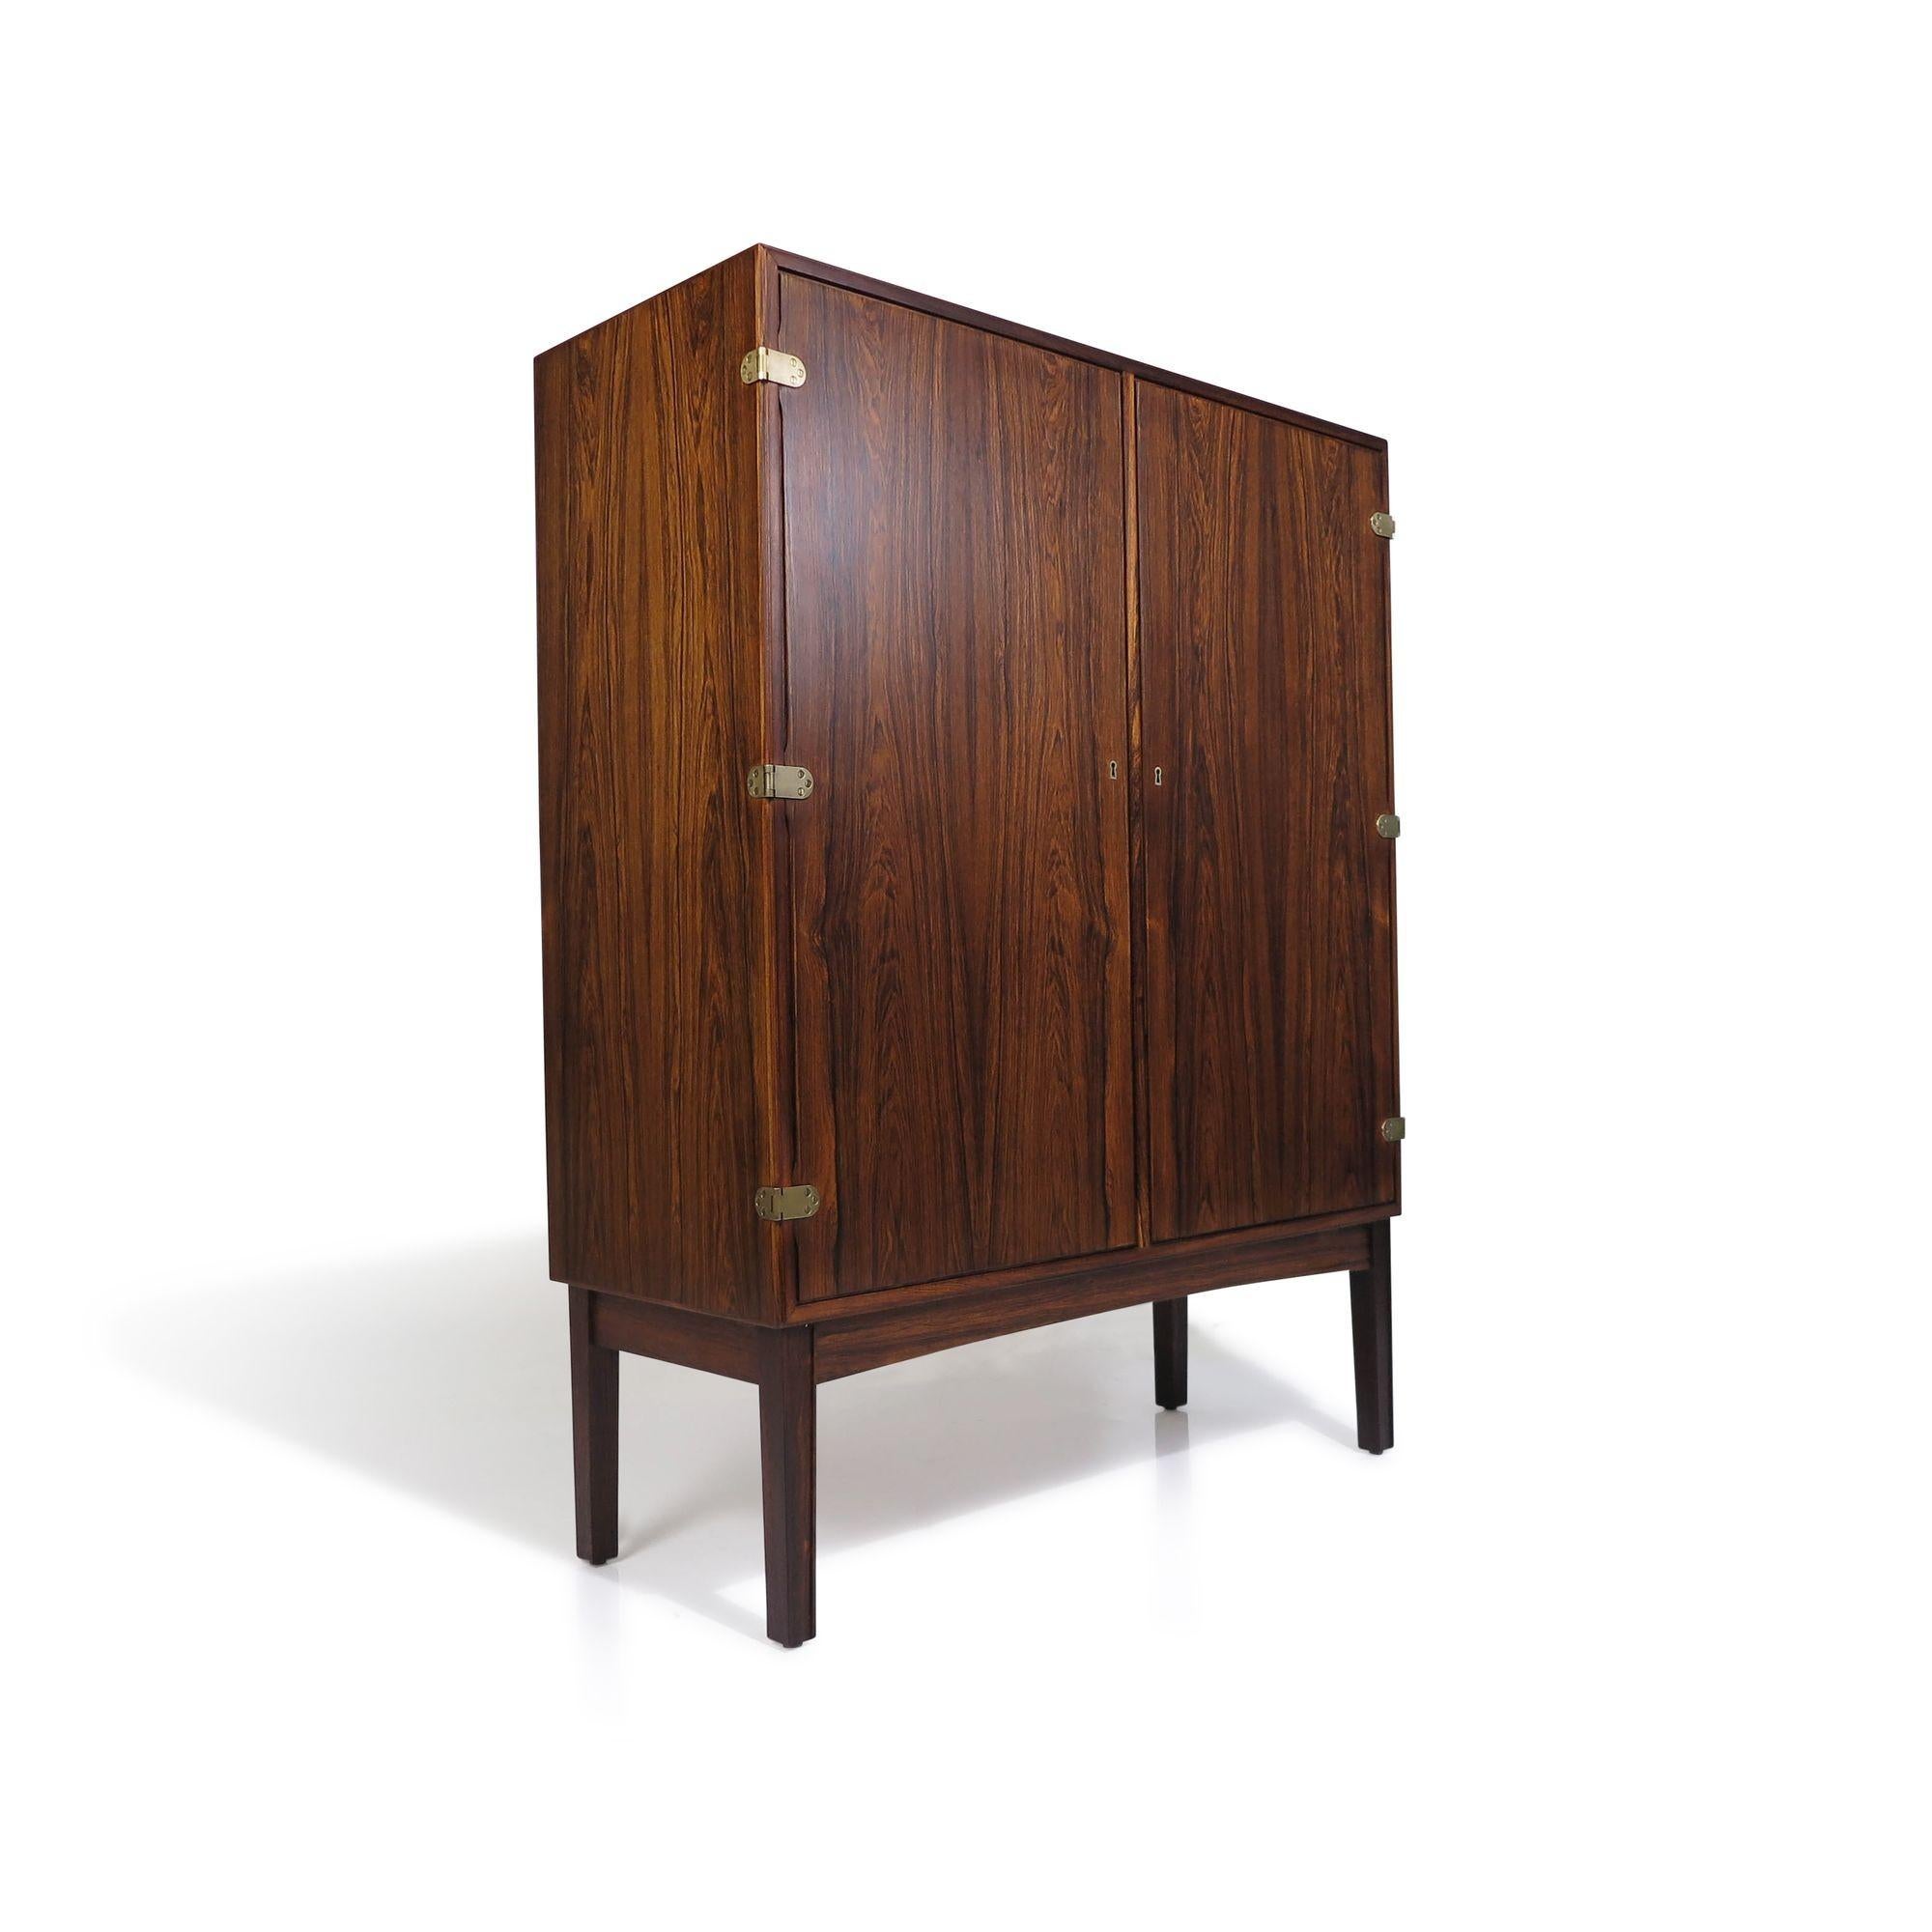 Borge Mogensen Rosewood Bar Cabinet, Denmark 1948 In Excellent Condition For Sale In Oakland, CA